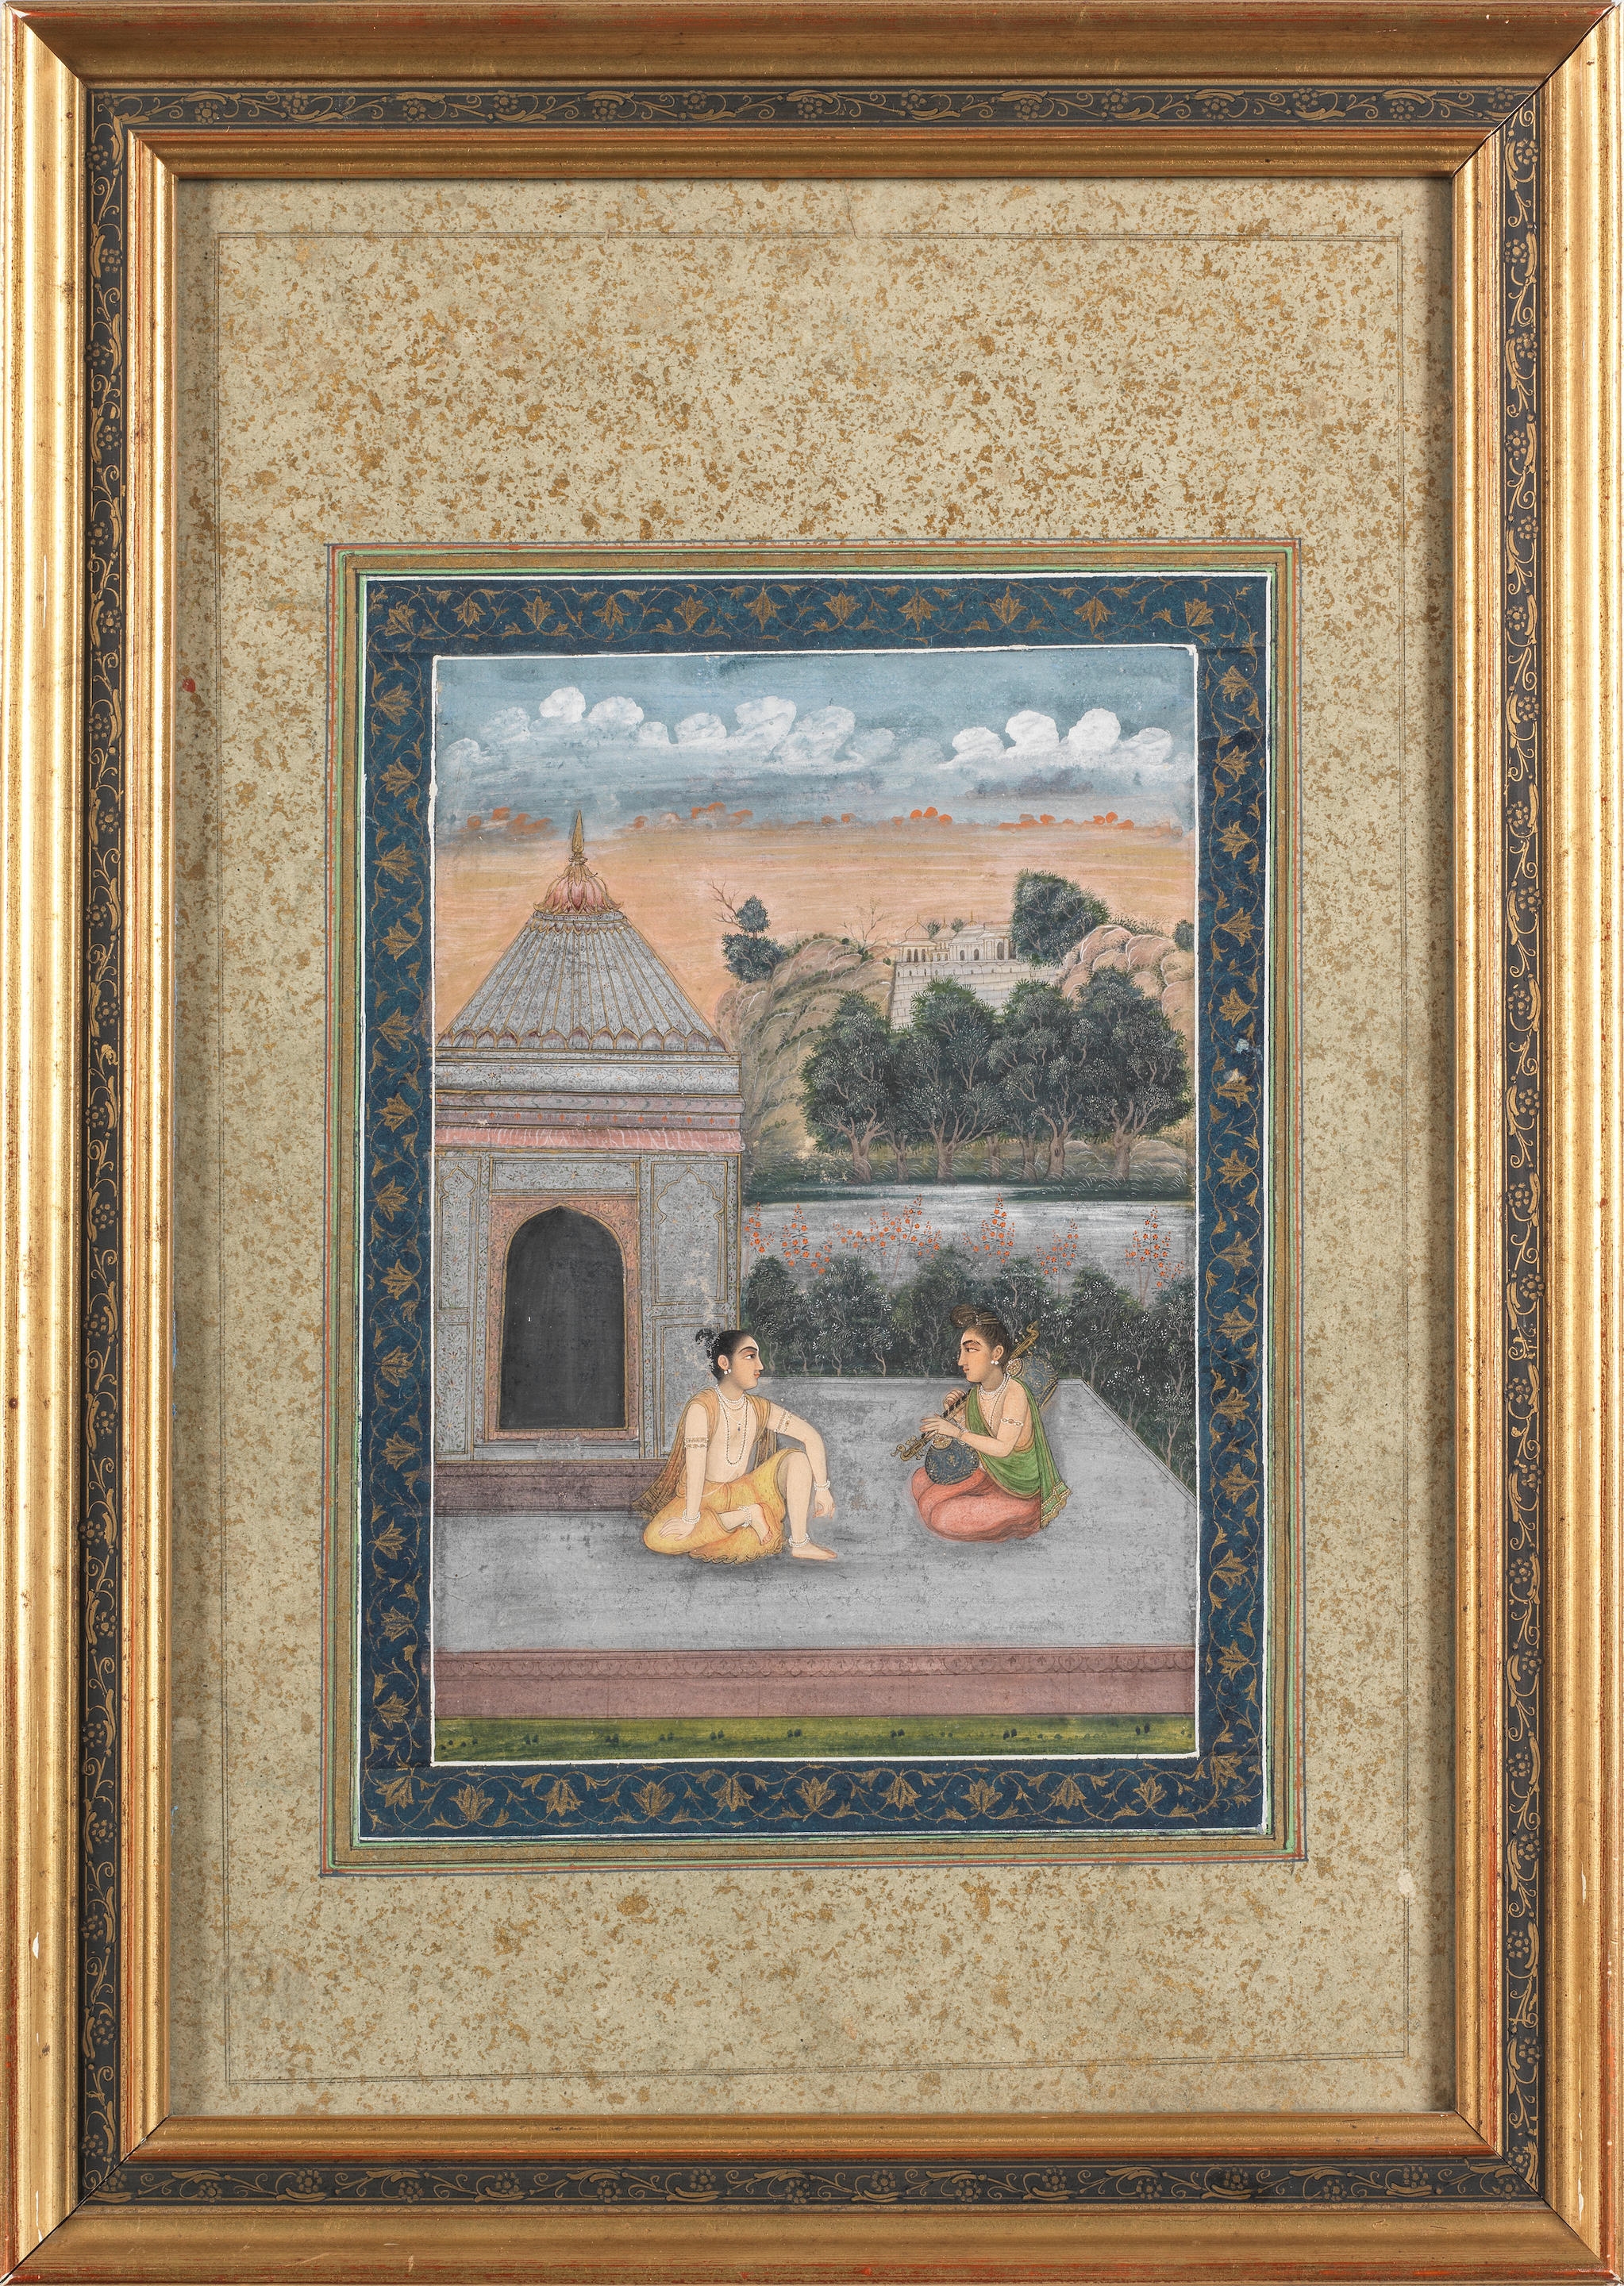 Kedar ragini : a noble devotee seated on a terrace beside a pavilion, listening to an ascetic playing a vina by Mughal School, 18th Century, circa 1780